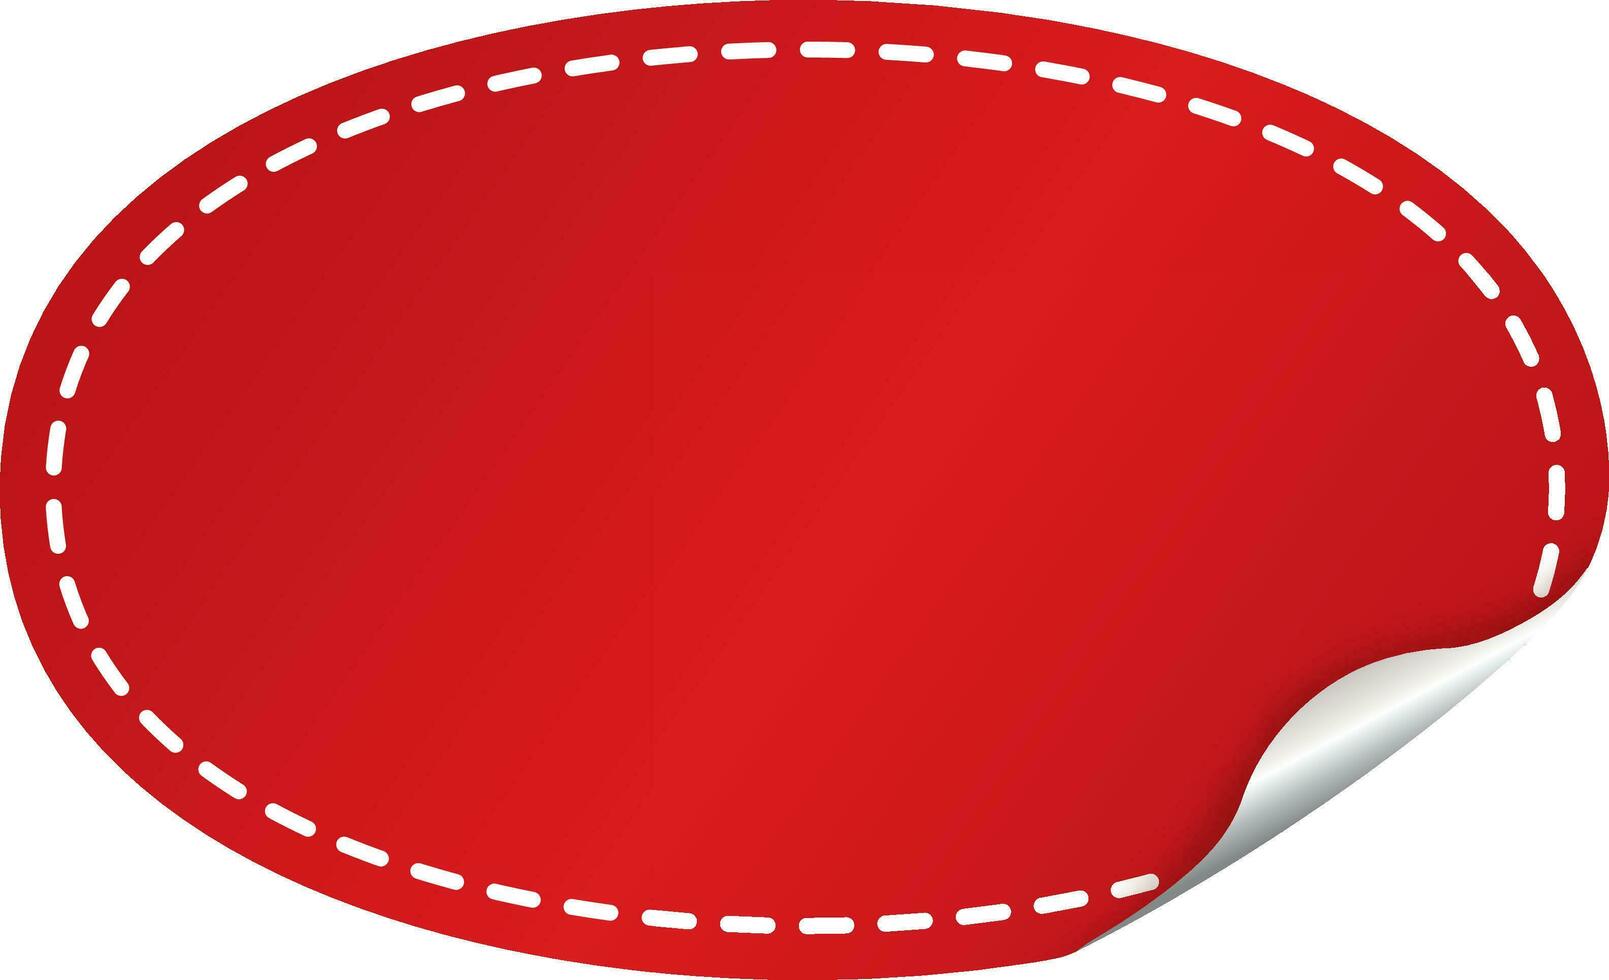 Blank Paper Round Badge Or Label In Red Color. vector